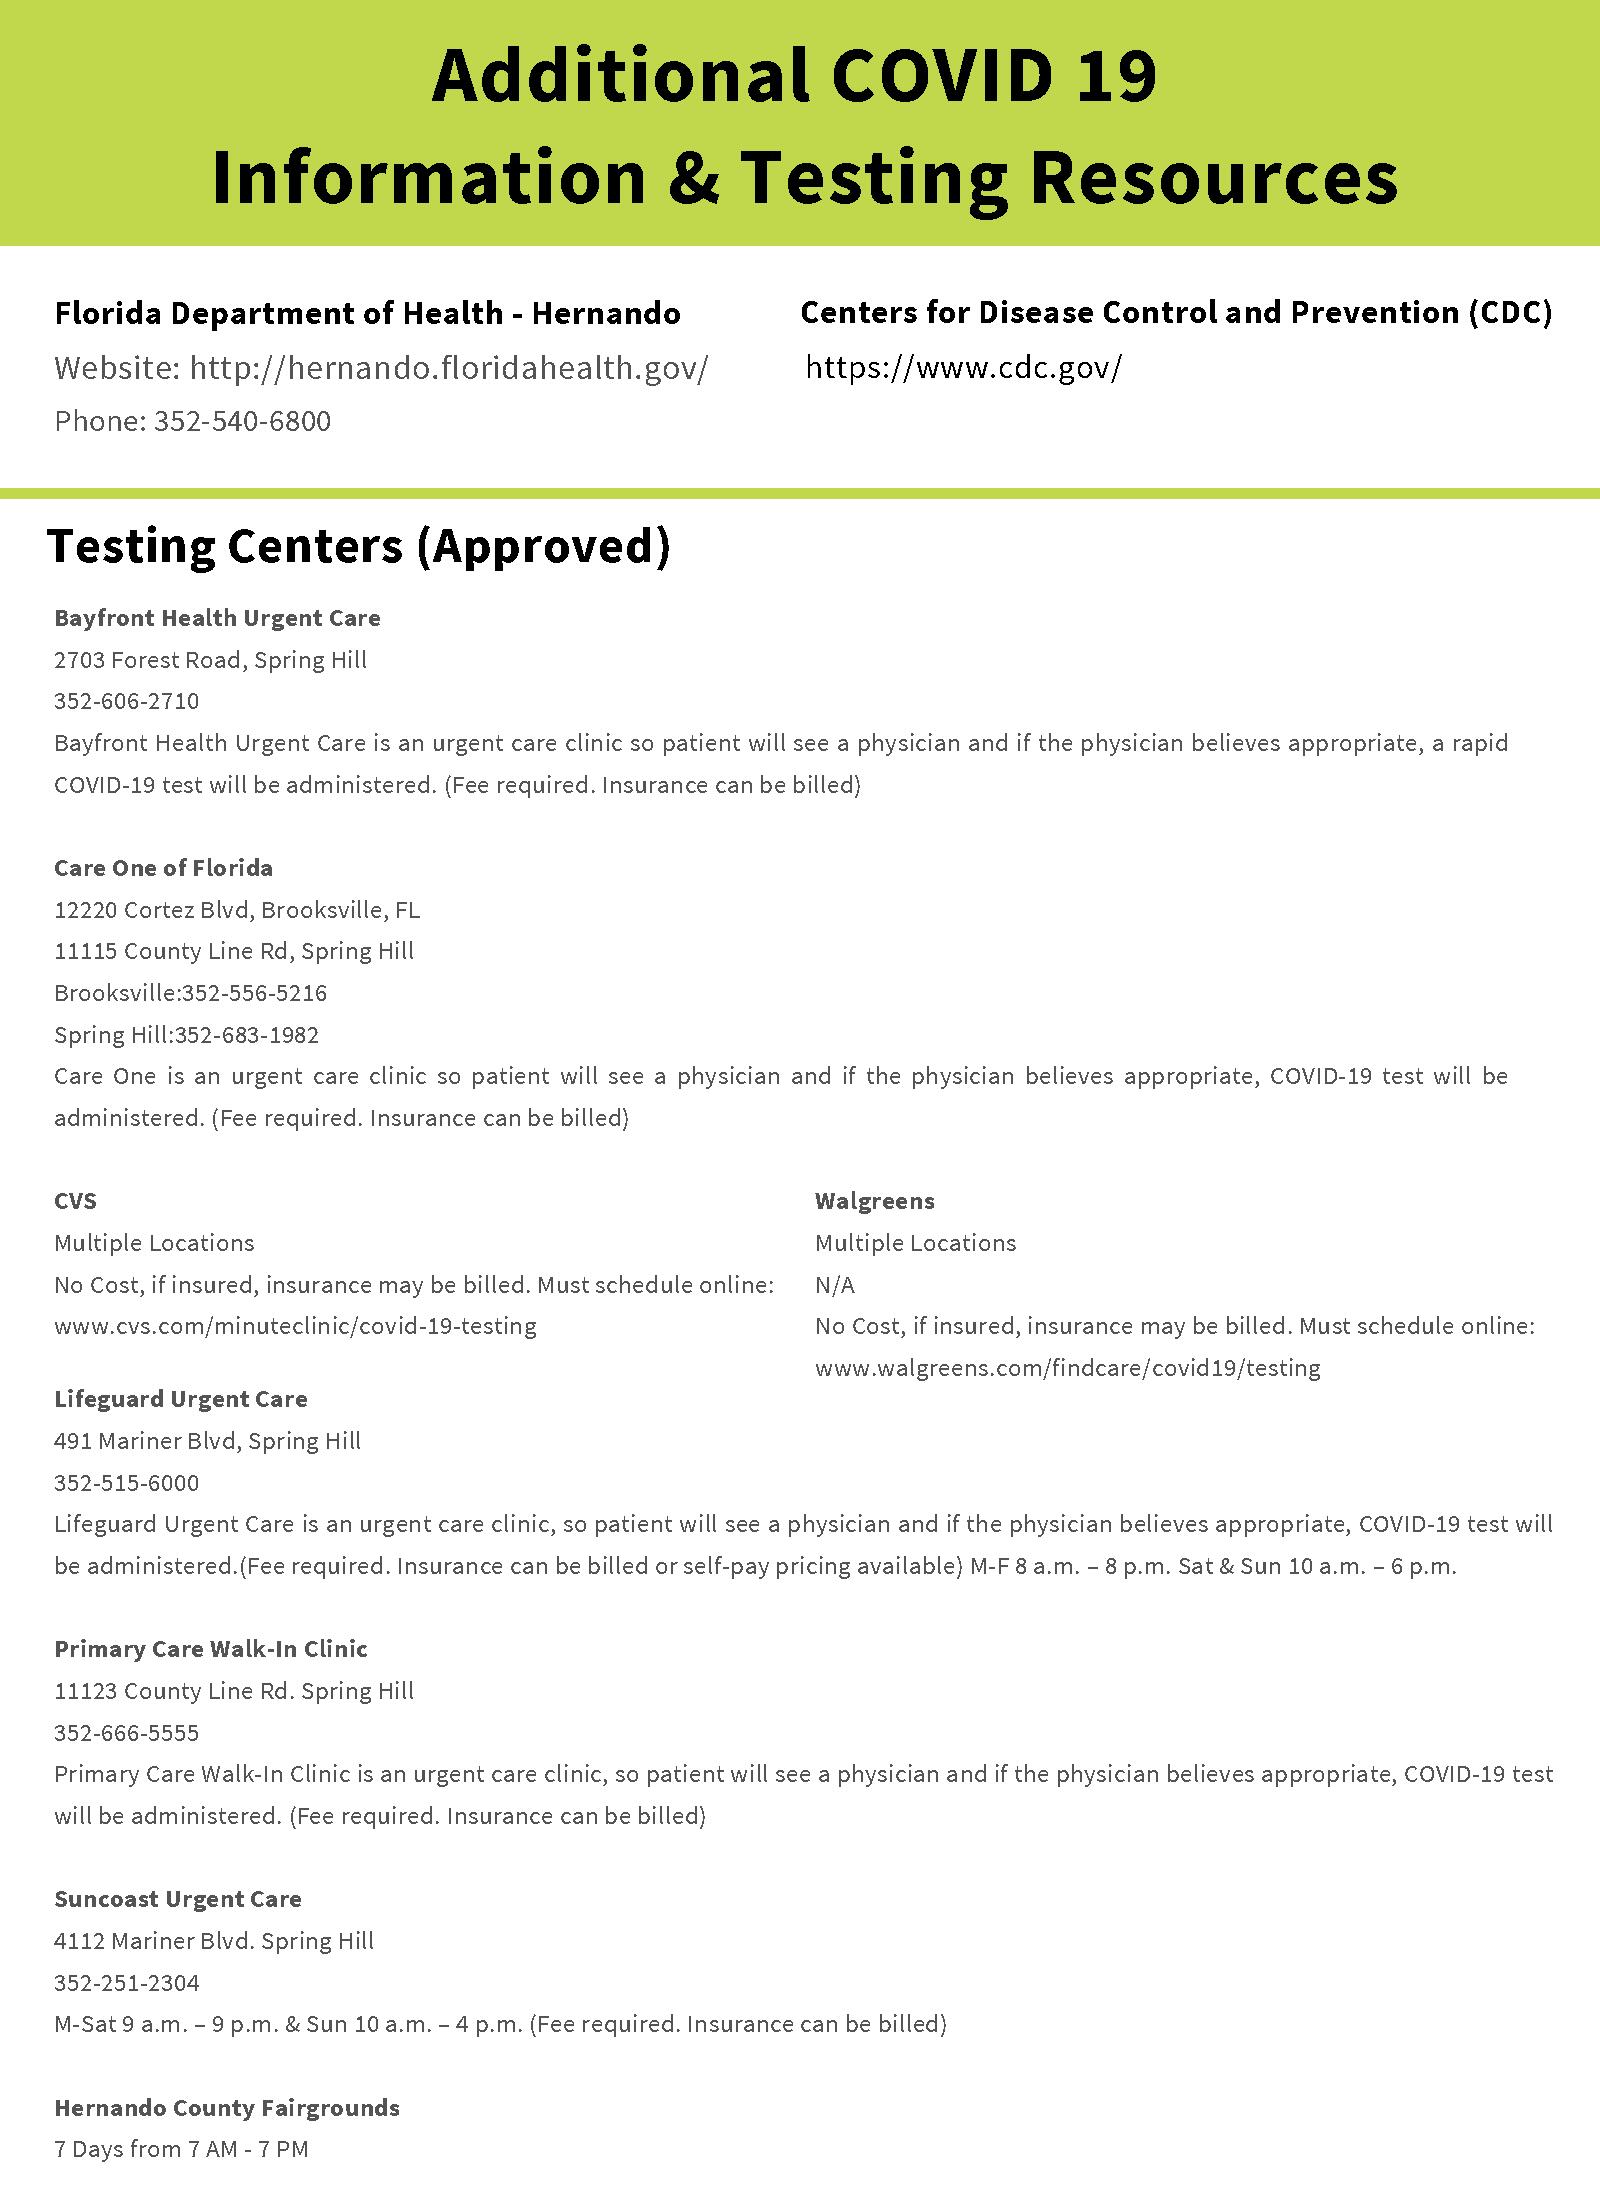 Testing Centers